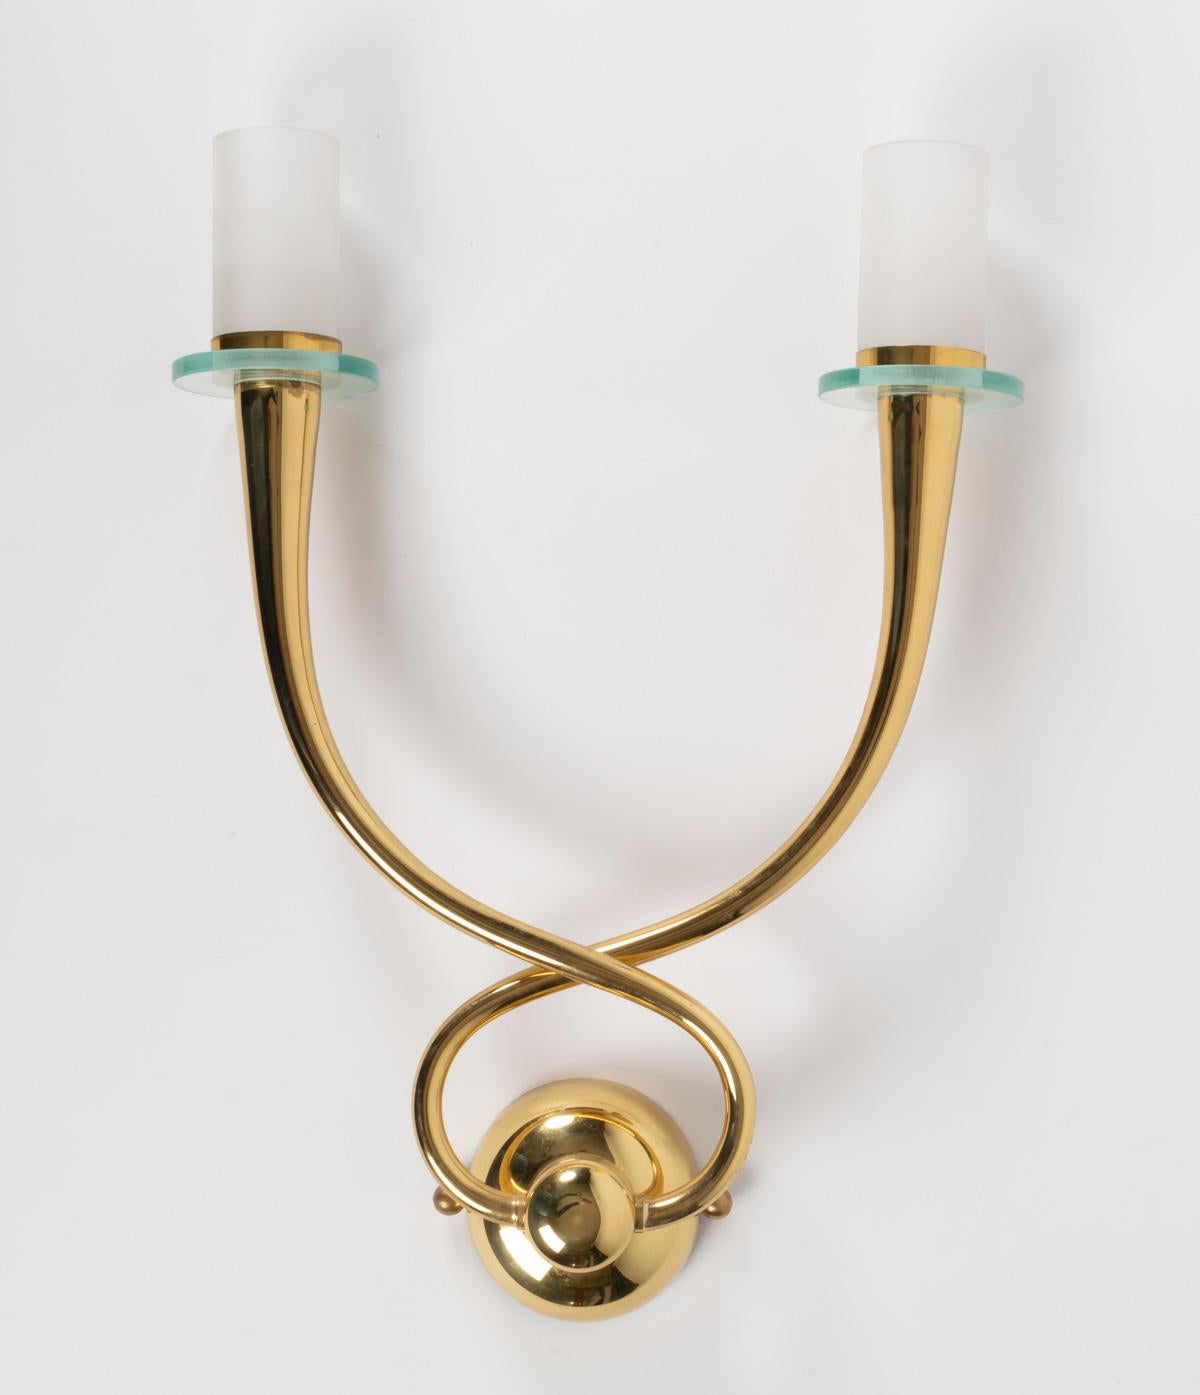 Made entirely of gilded brass, the sconces feature two stylized arms in the form of stretched cones that intersect at the base. At the intersection of the cones, a round back wall plate supports the sconce. 
On the upper part of the cones, glass